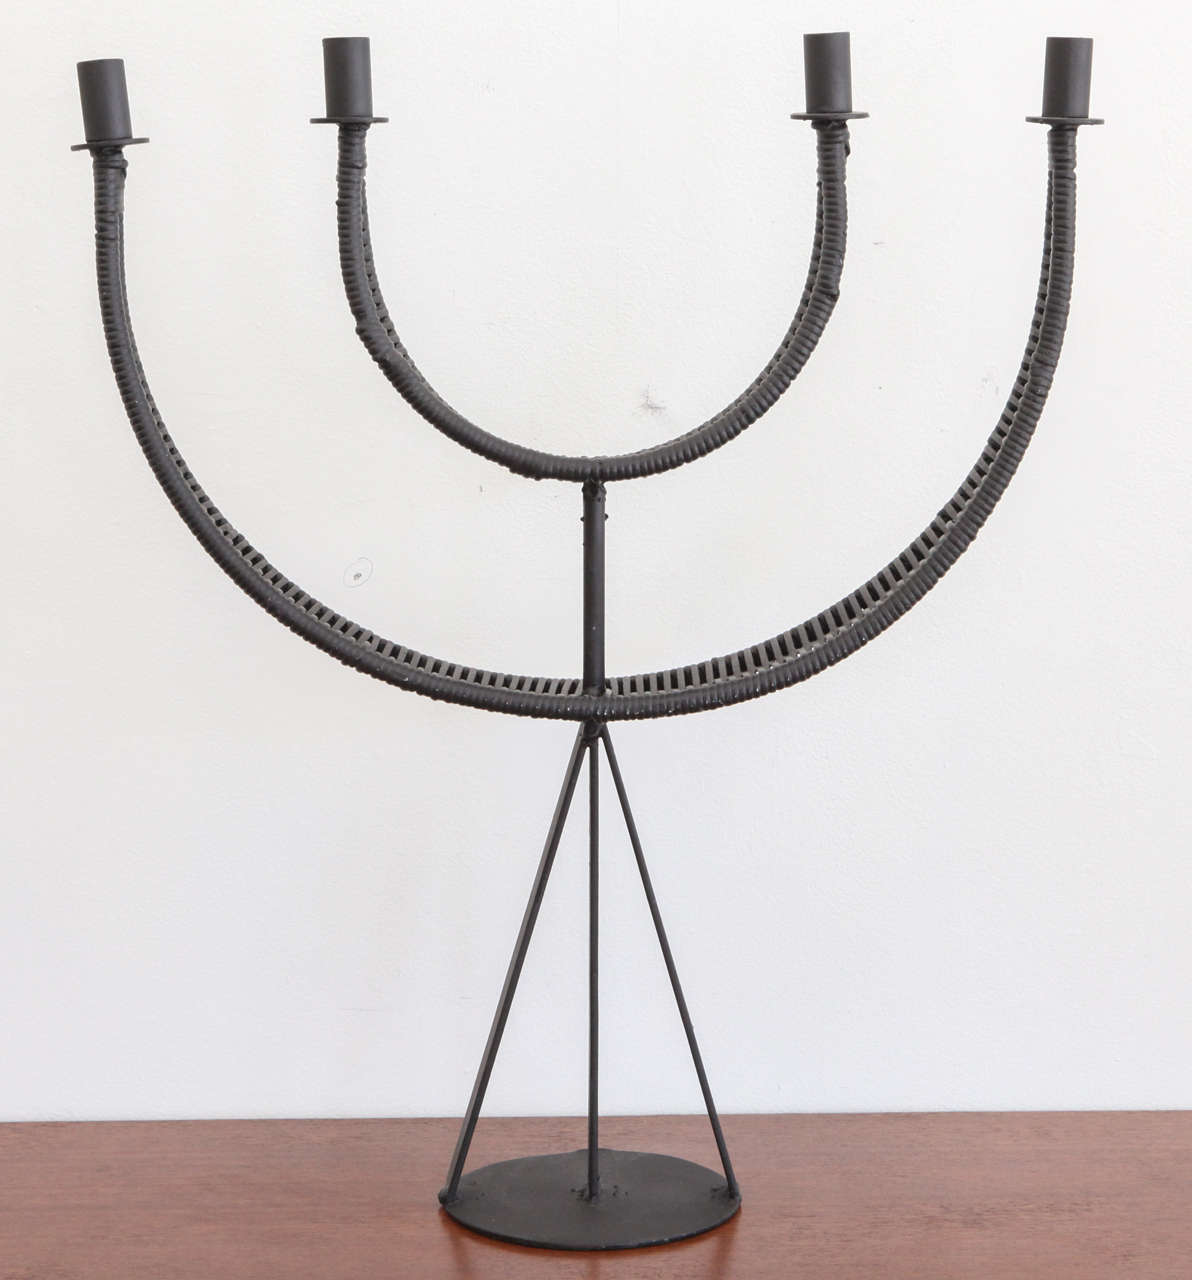 Made of wrought iron and rattan, this Arthur Umanoff for Raymor candleholder makes for a wonderful centerpiece on your dining table, whether al fresco or otherwise! It's a fantastic example of classic mid-century design.